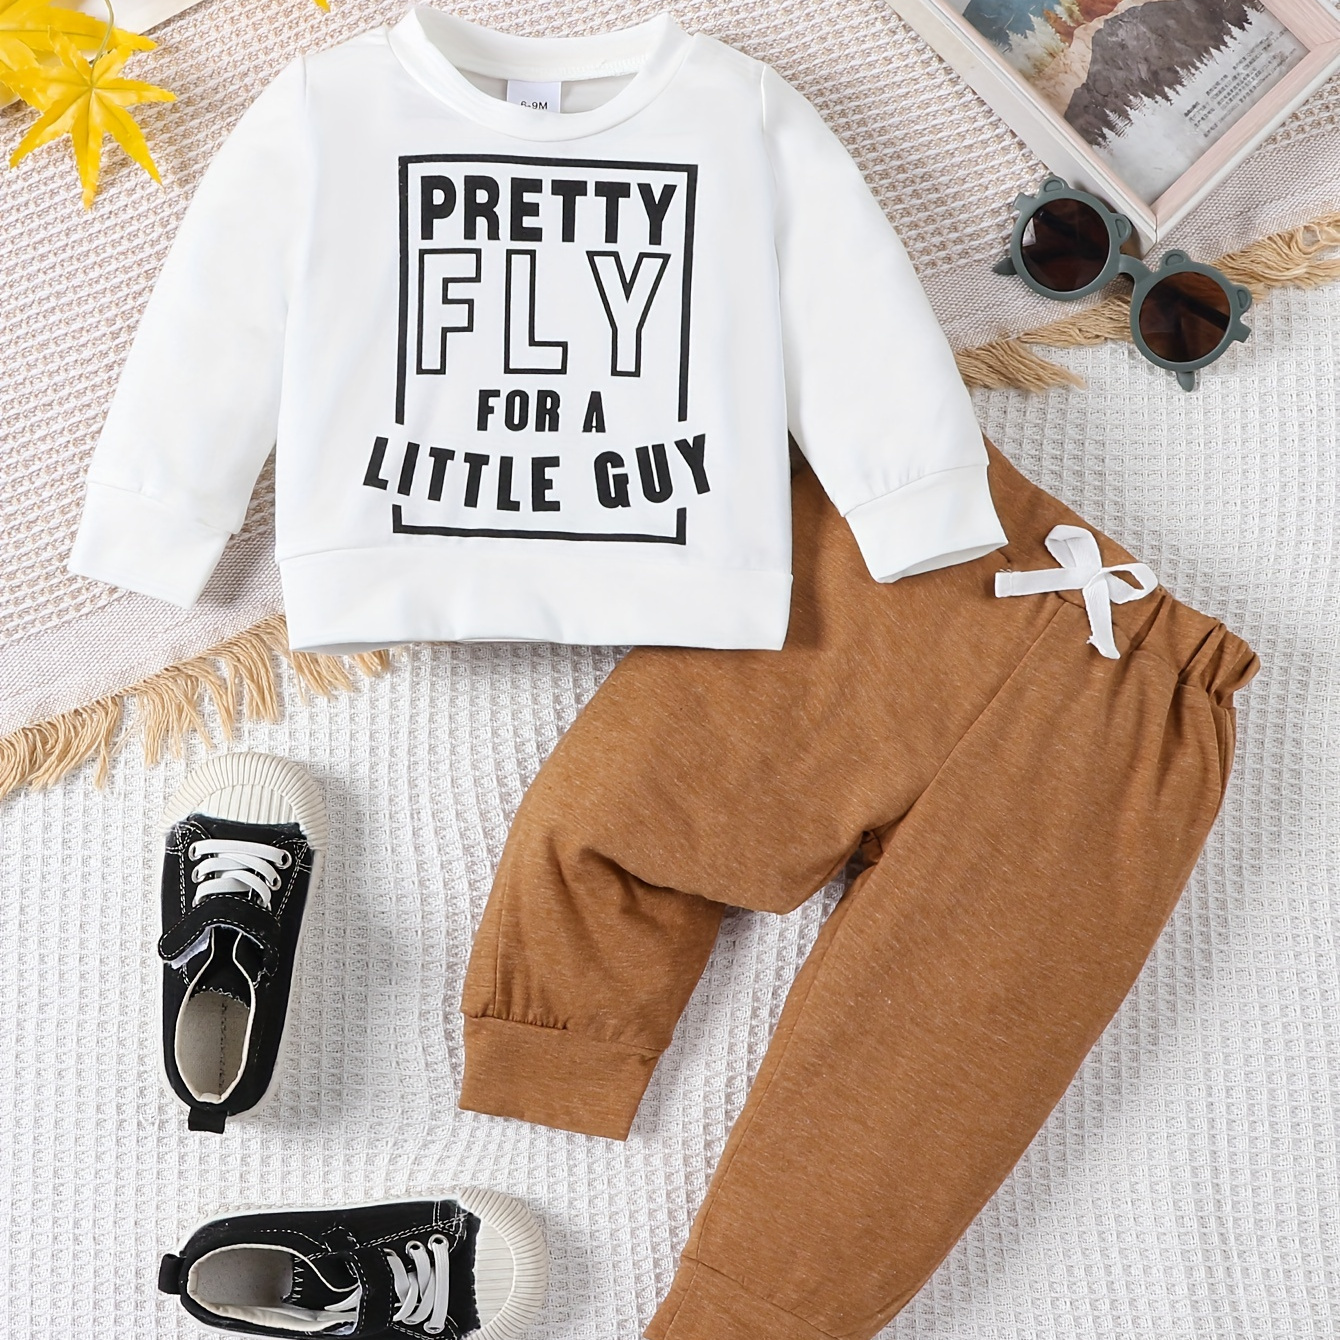 

Baby Boy's Cotton Matching Outfit - Letter Print Long Sleeve Round Neck Top + Joggers Pants Set - Pretty Fly For A Little Guy